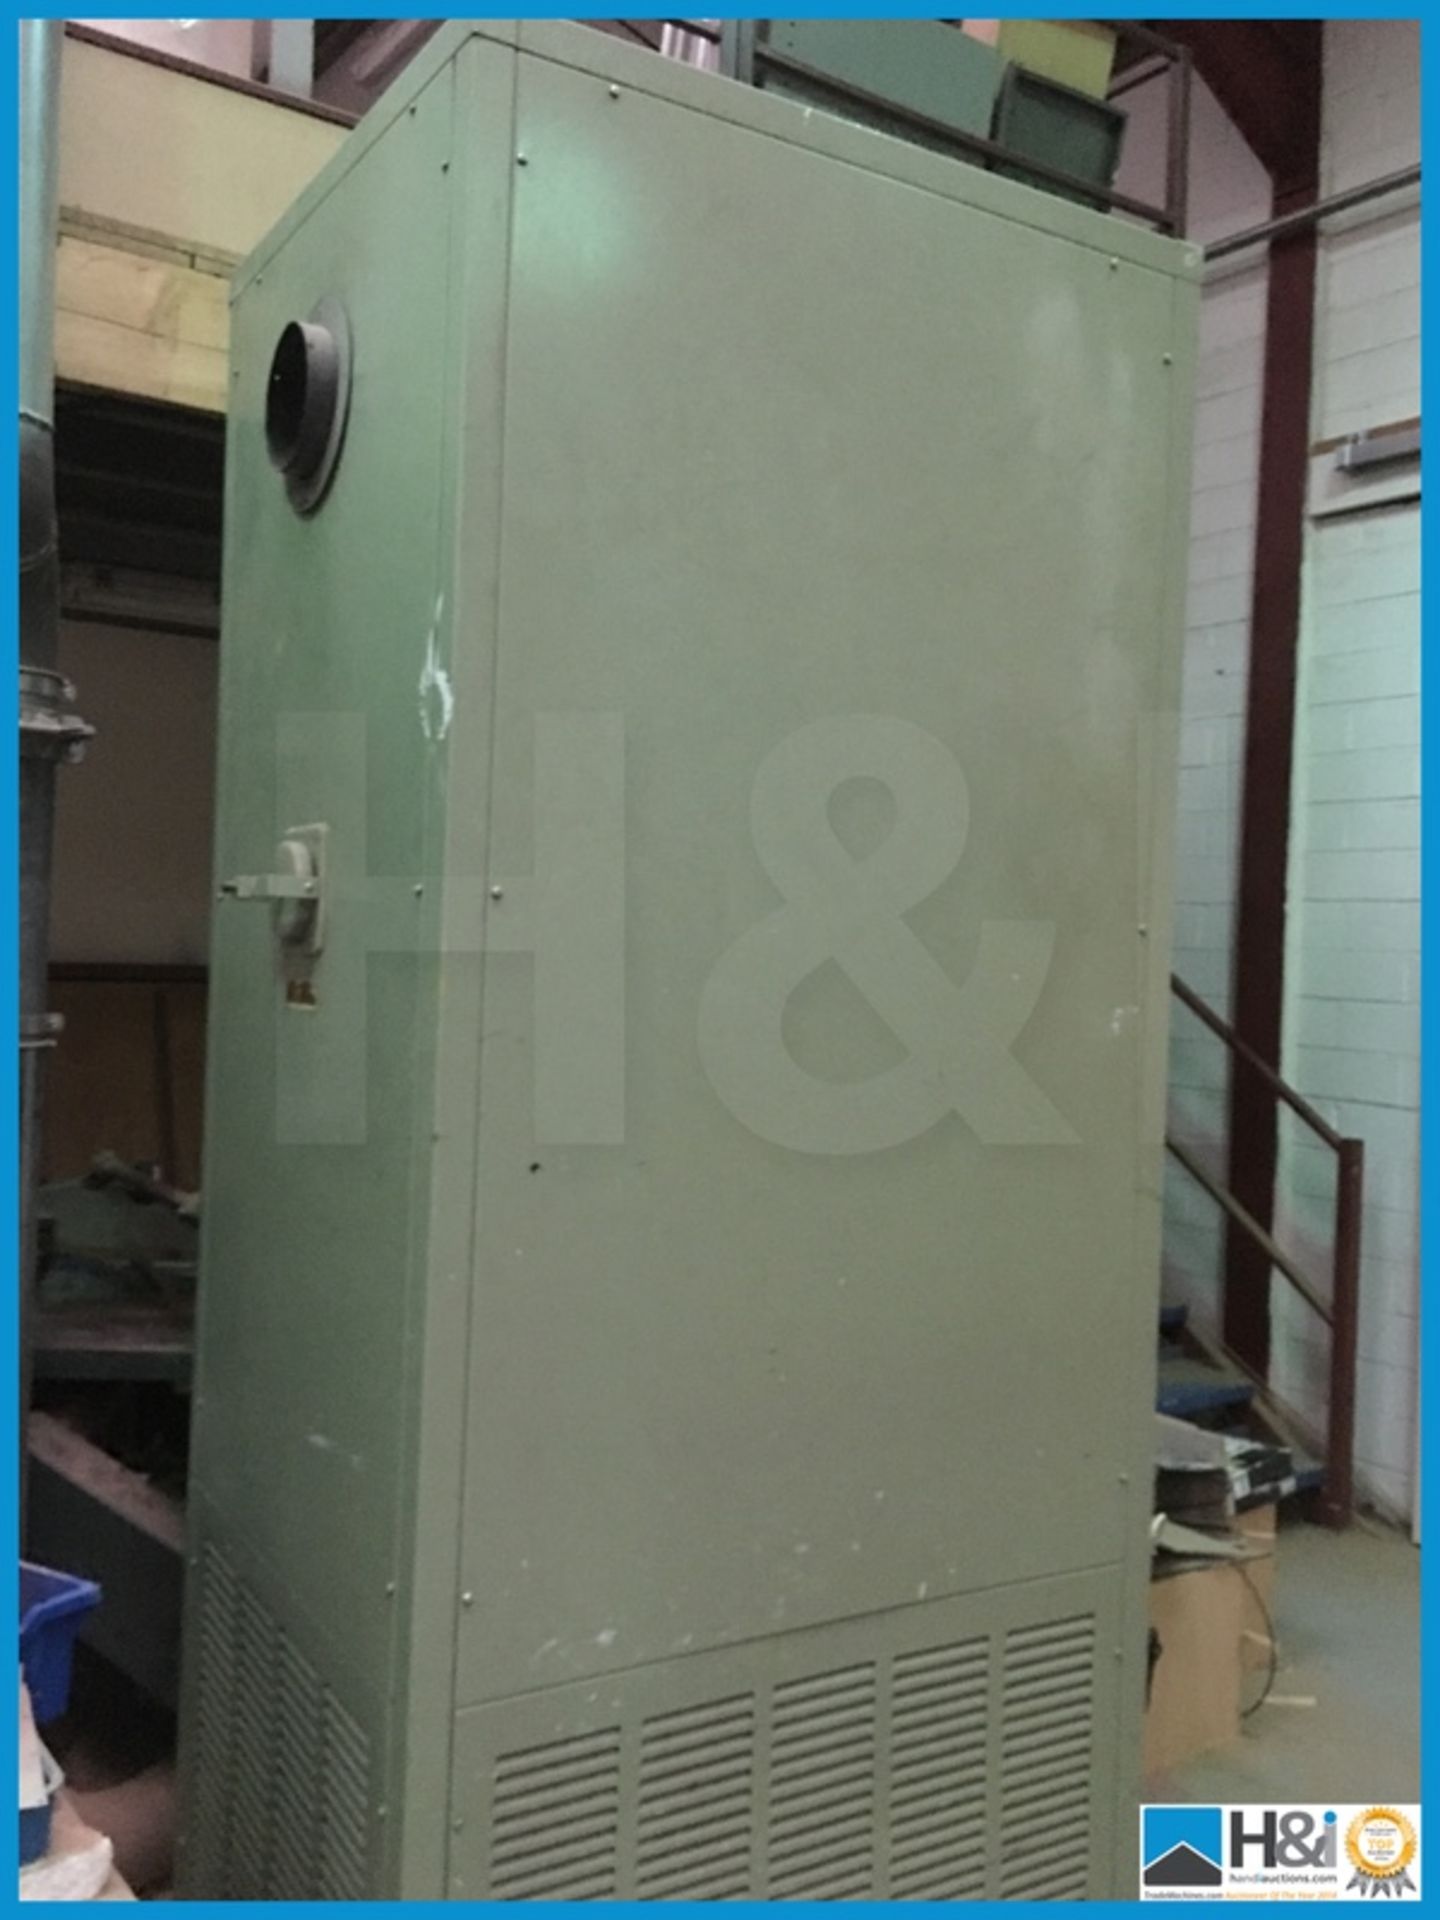 PowrMatic oil heater in excellent condition been in showroom enviroment Appraisal: Viewing